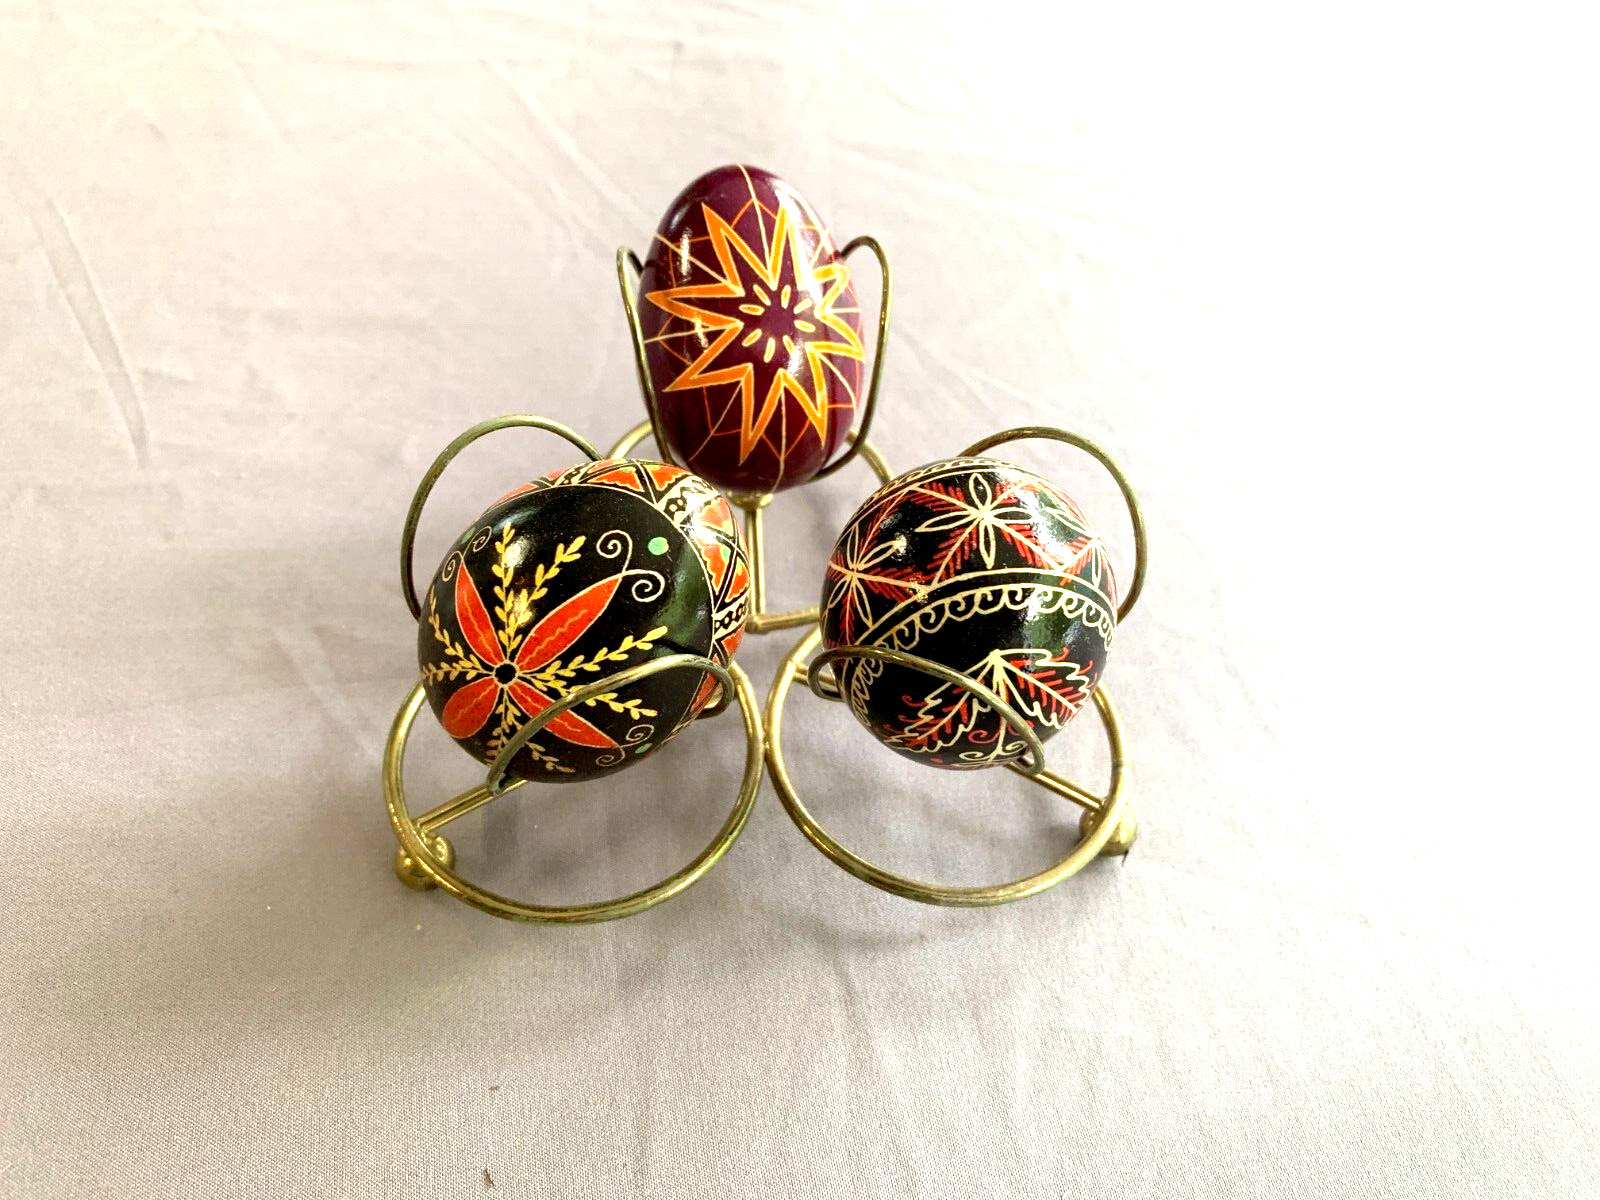 3 Vintage Pysanky Pysanki Eggs Hand Painted Wooden Russian w/ Brass Egg Holder